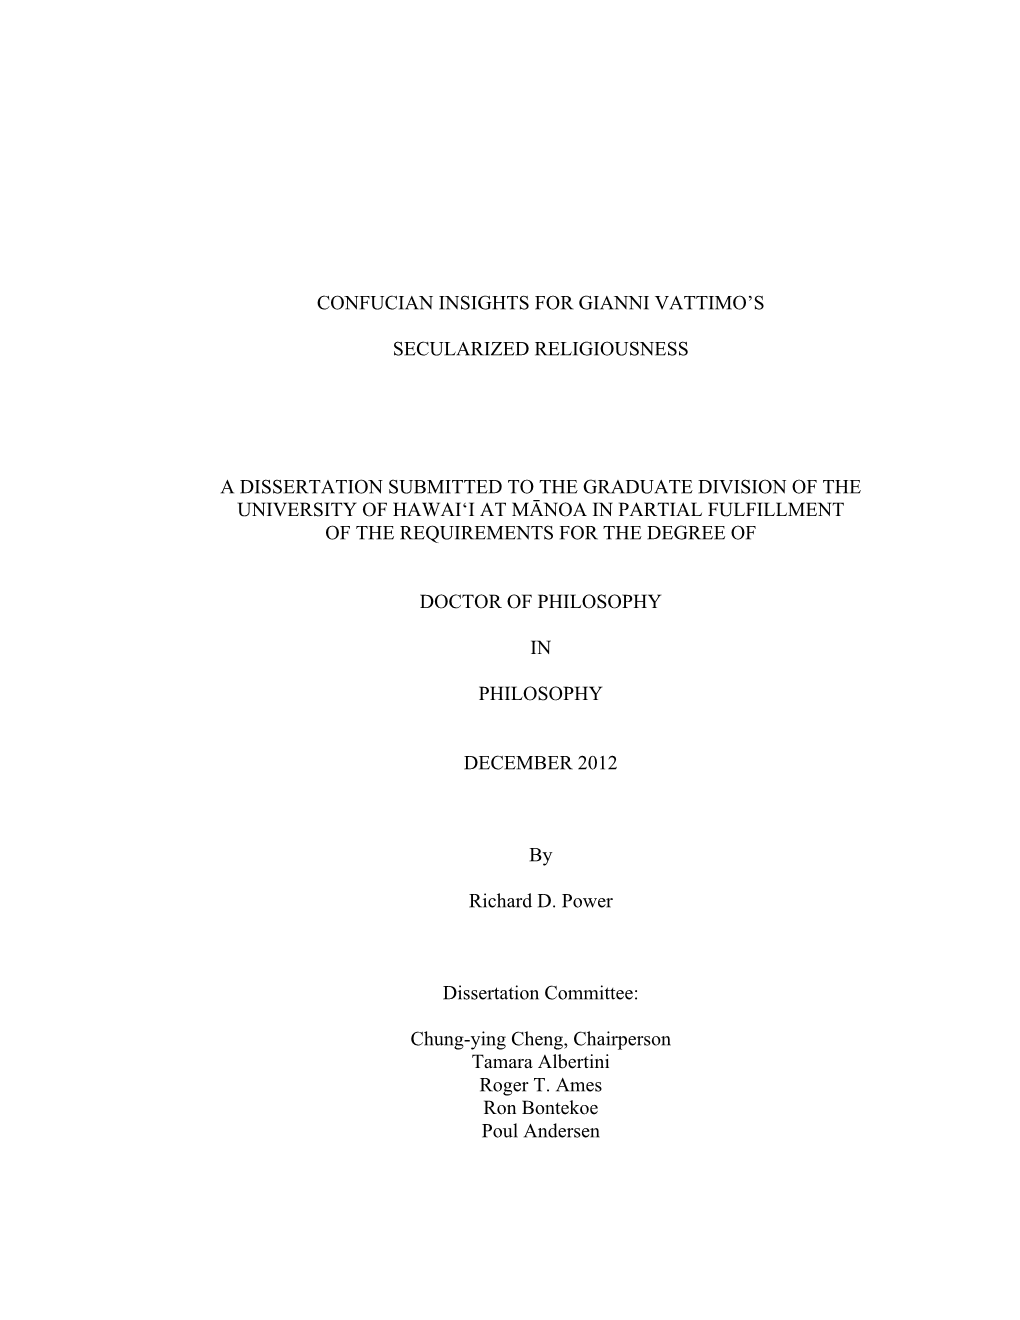 Confucian Insights for Gianni Vattimo's Secularized Religiousness a Dissertation Submitted to the Graduate Division of the U